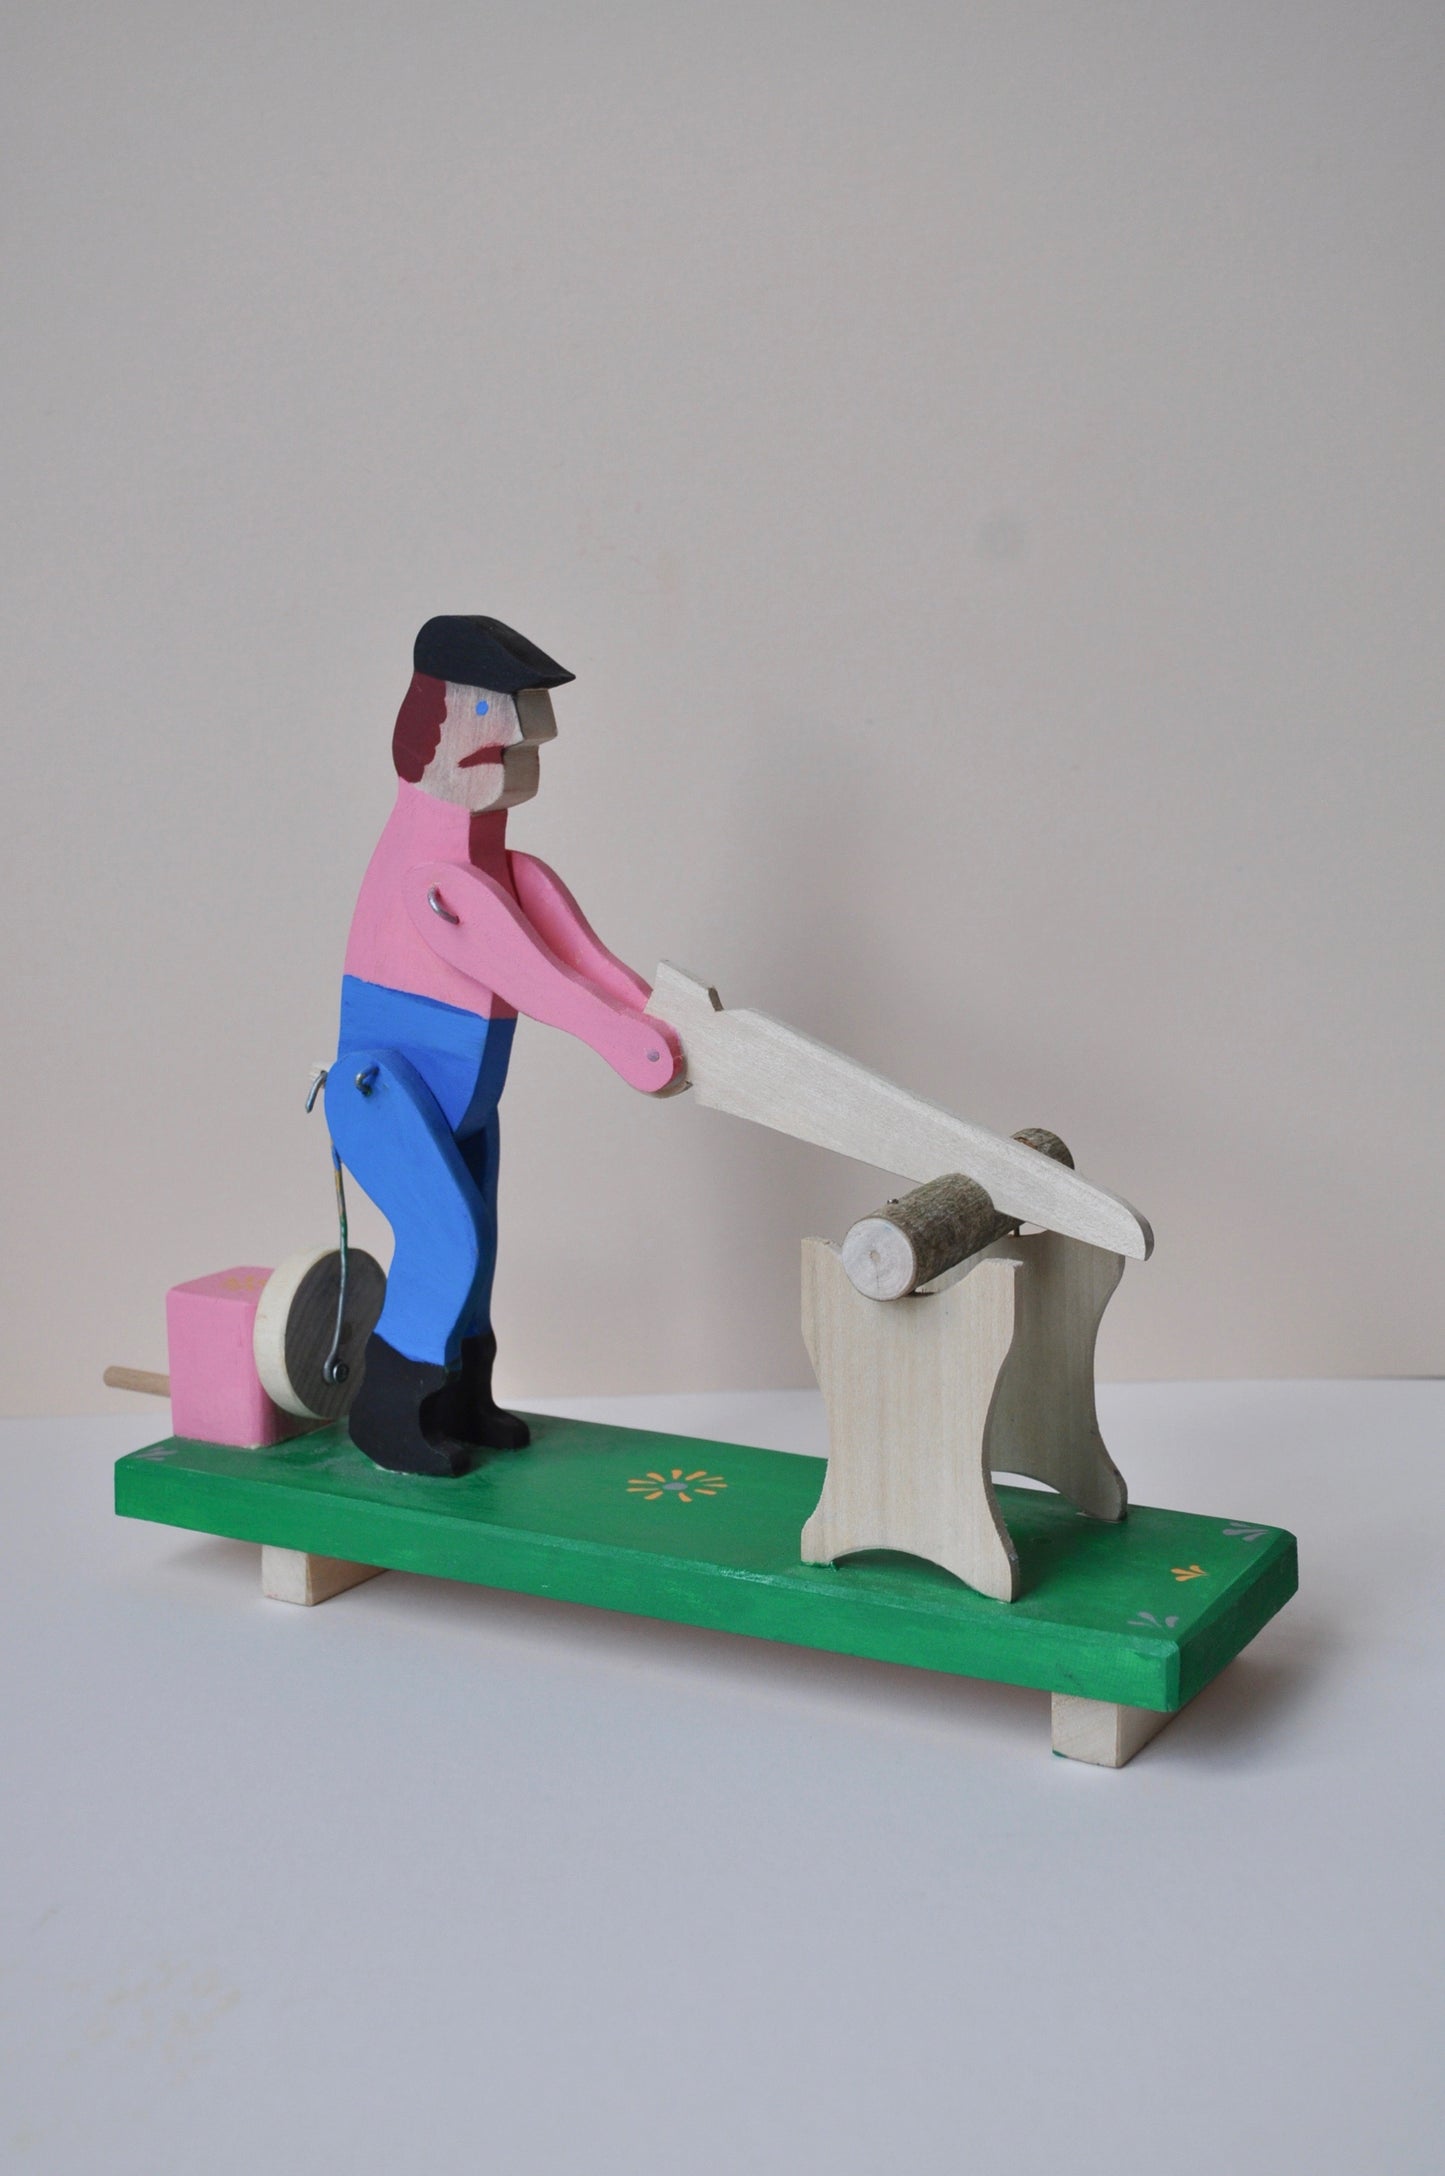 Man Cutting Wood Kinetic Wooden Toy